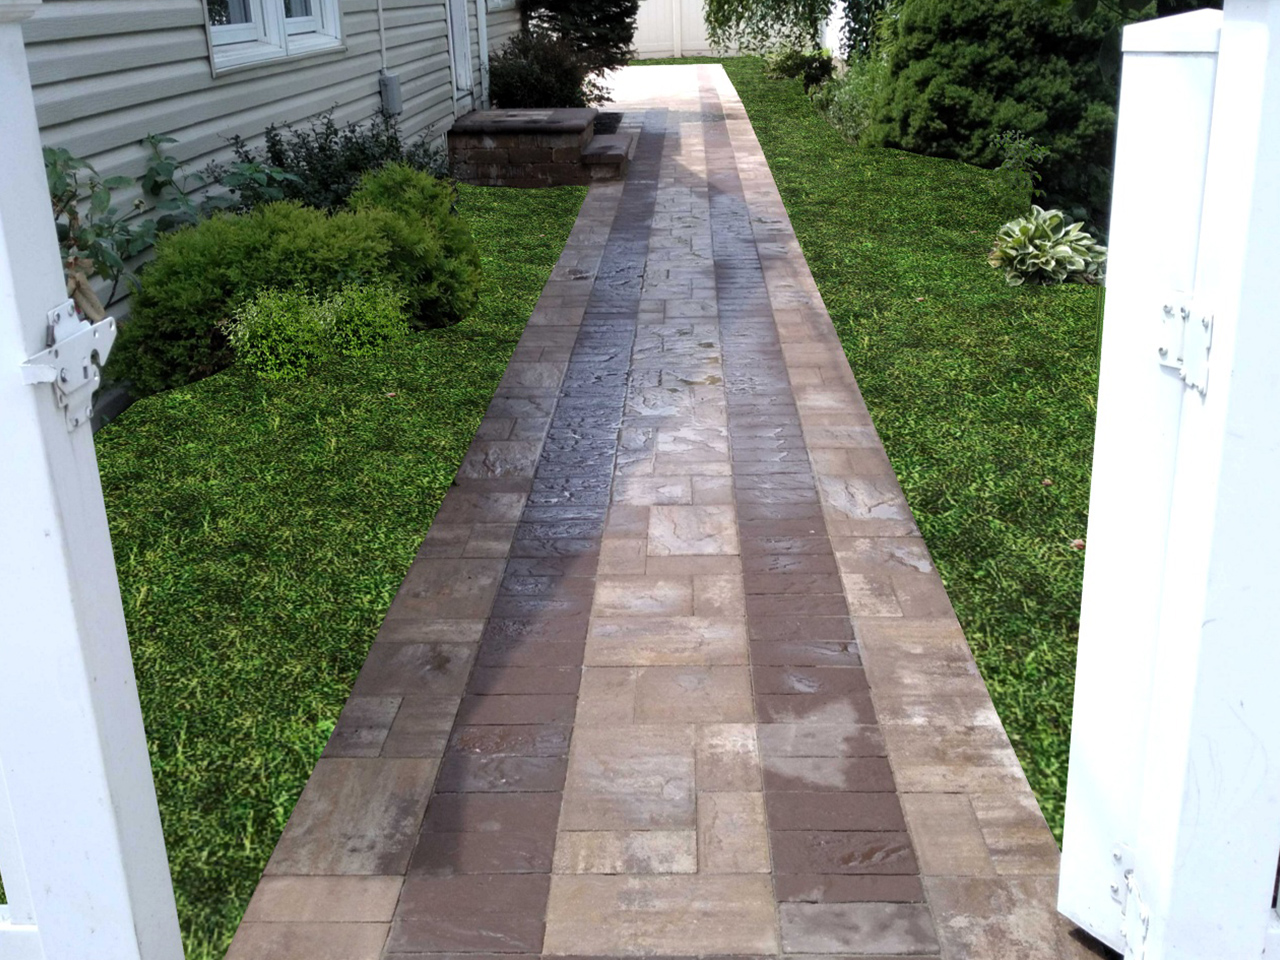 paver walkway installation. A freshly installed walkway by Affordable Patio, featuring clean lines and a modern design